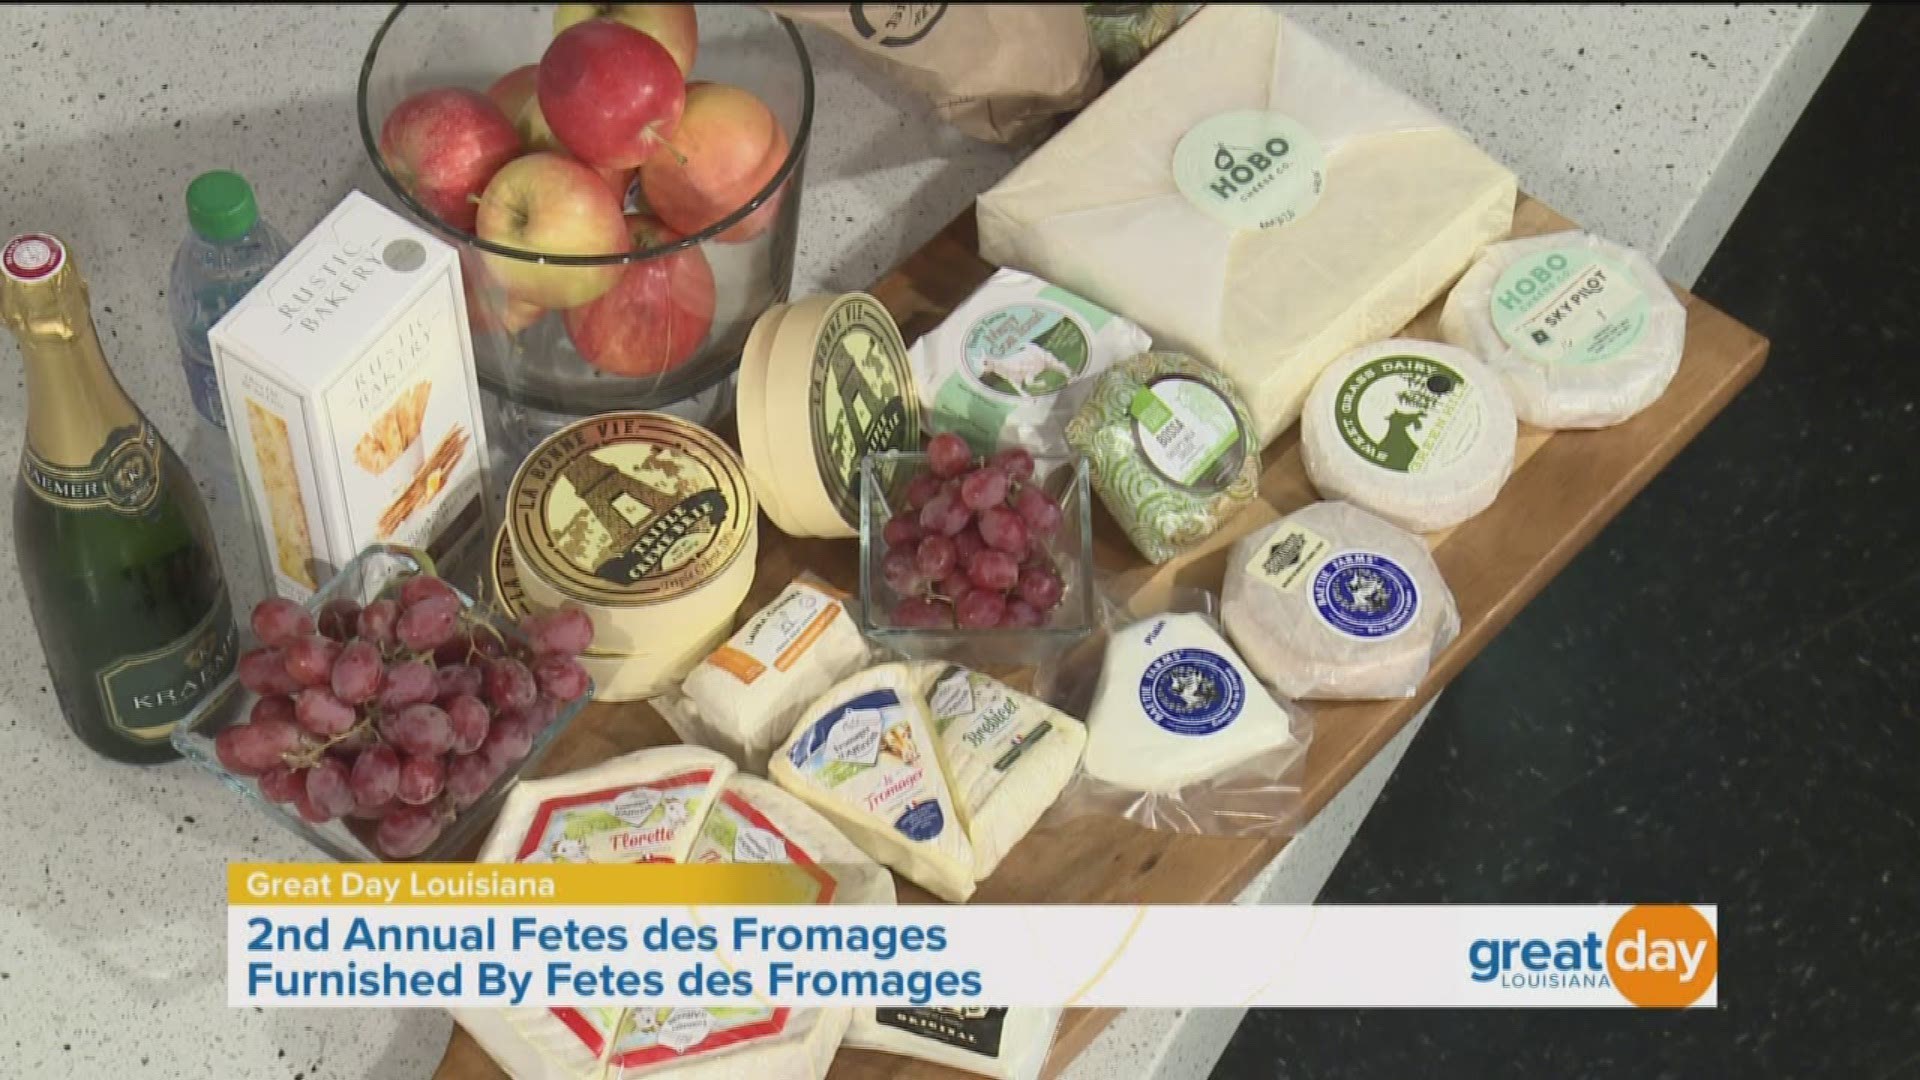 Fete des Fromages offers the chance to taste over 150 cheeses! This is happening Saturday, November 16th from noon-4pm at the N.O. Jazz Museum at 400 Esplanade Ave.